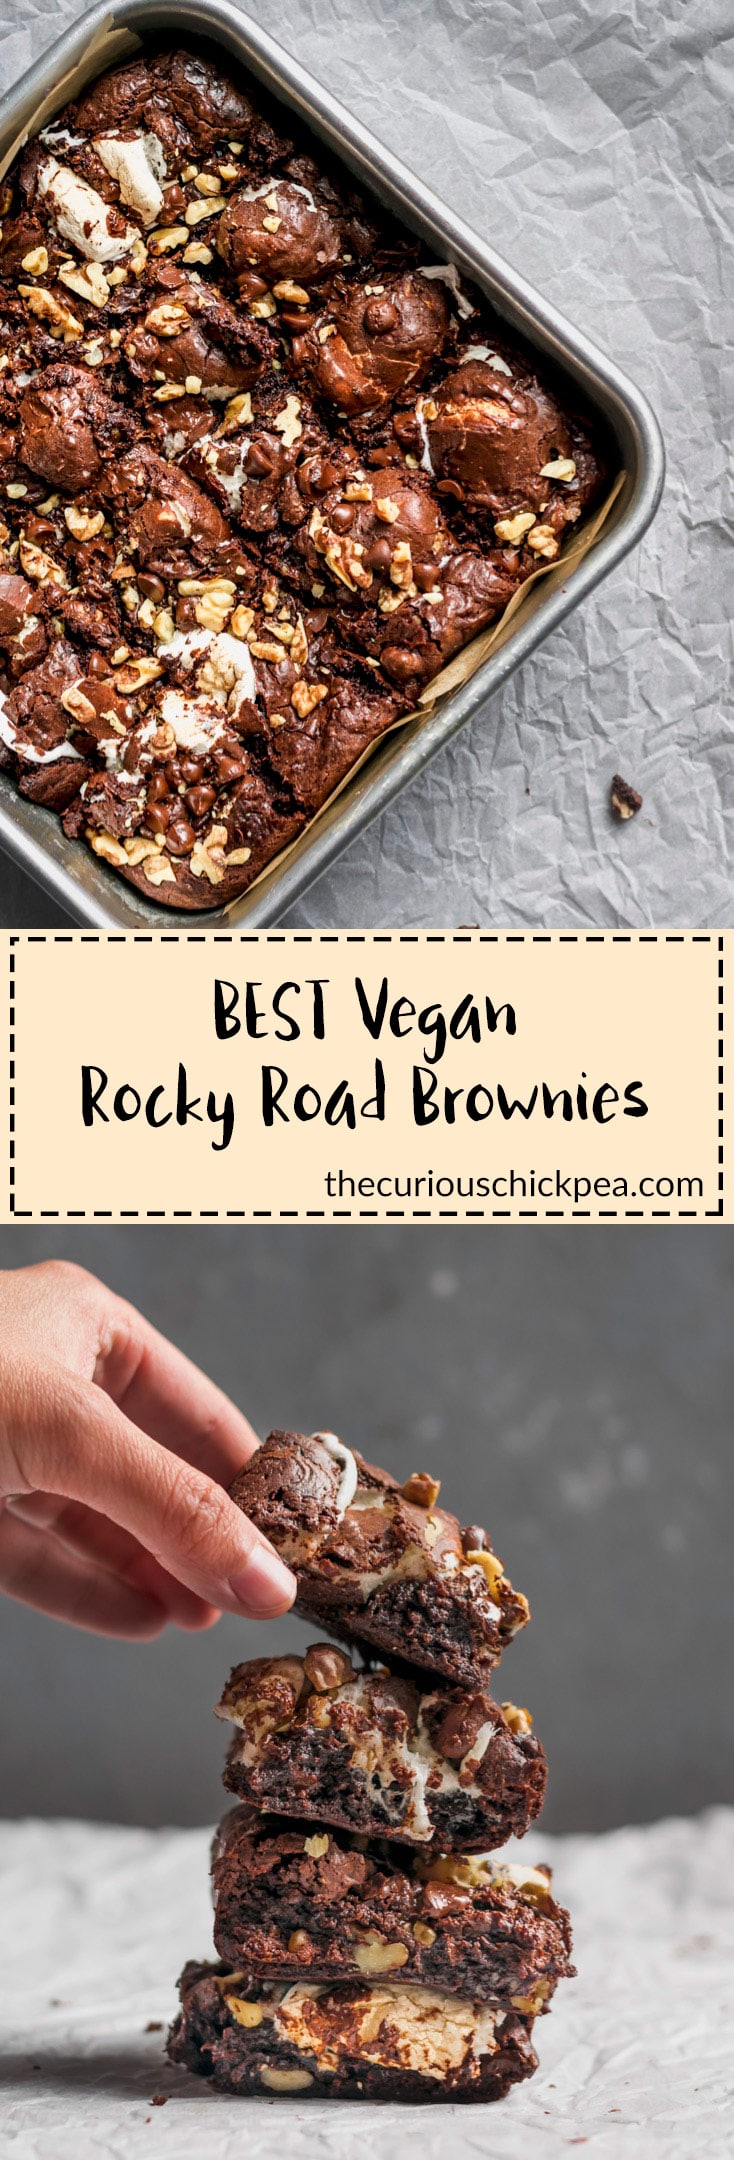 BEST Vegan Rocky Road Brownies | The search for the perfect vegan brownie stops here. They're extra delicious and decadent when stuffed with chopped walnuts, chocolate chips, and vegan marshmallows for a rocky road rendition, but can also be made pure with no add-ins. And might I suggest serving a la mode with a scoop of your favorite vegan ice cream? | thecuriouschickpea.com #vegan #brownies